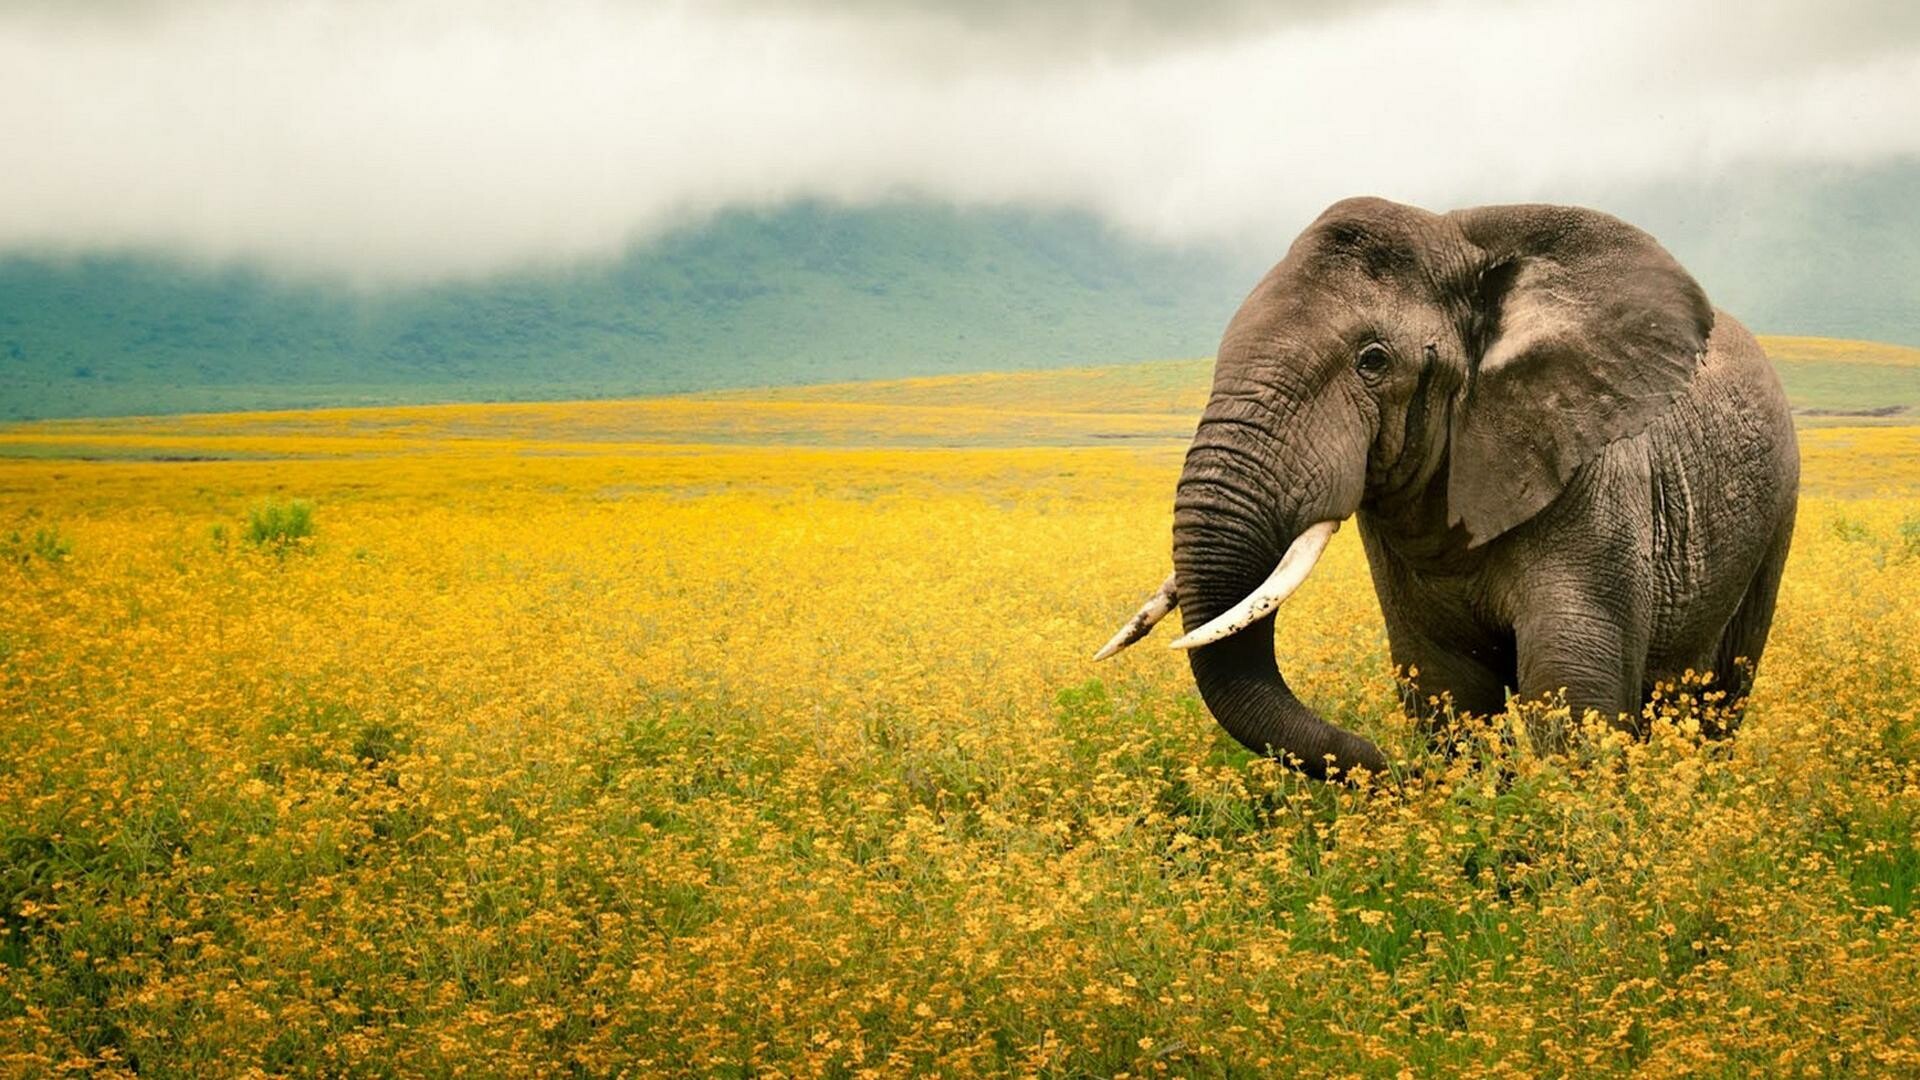 National Geographic: Elephant, The detail and complexity of the natural environment. 1920x1080 Full HD Wallpaper.